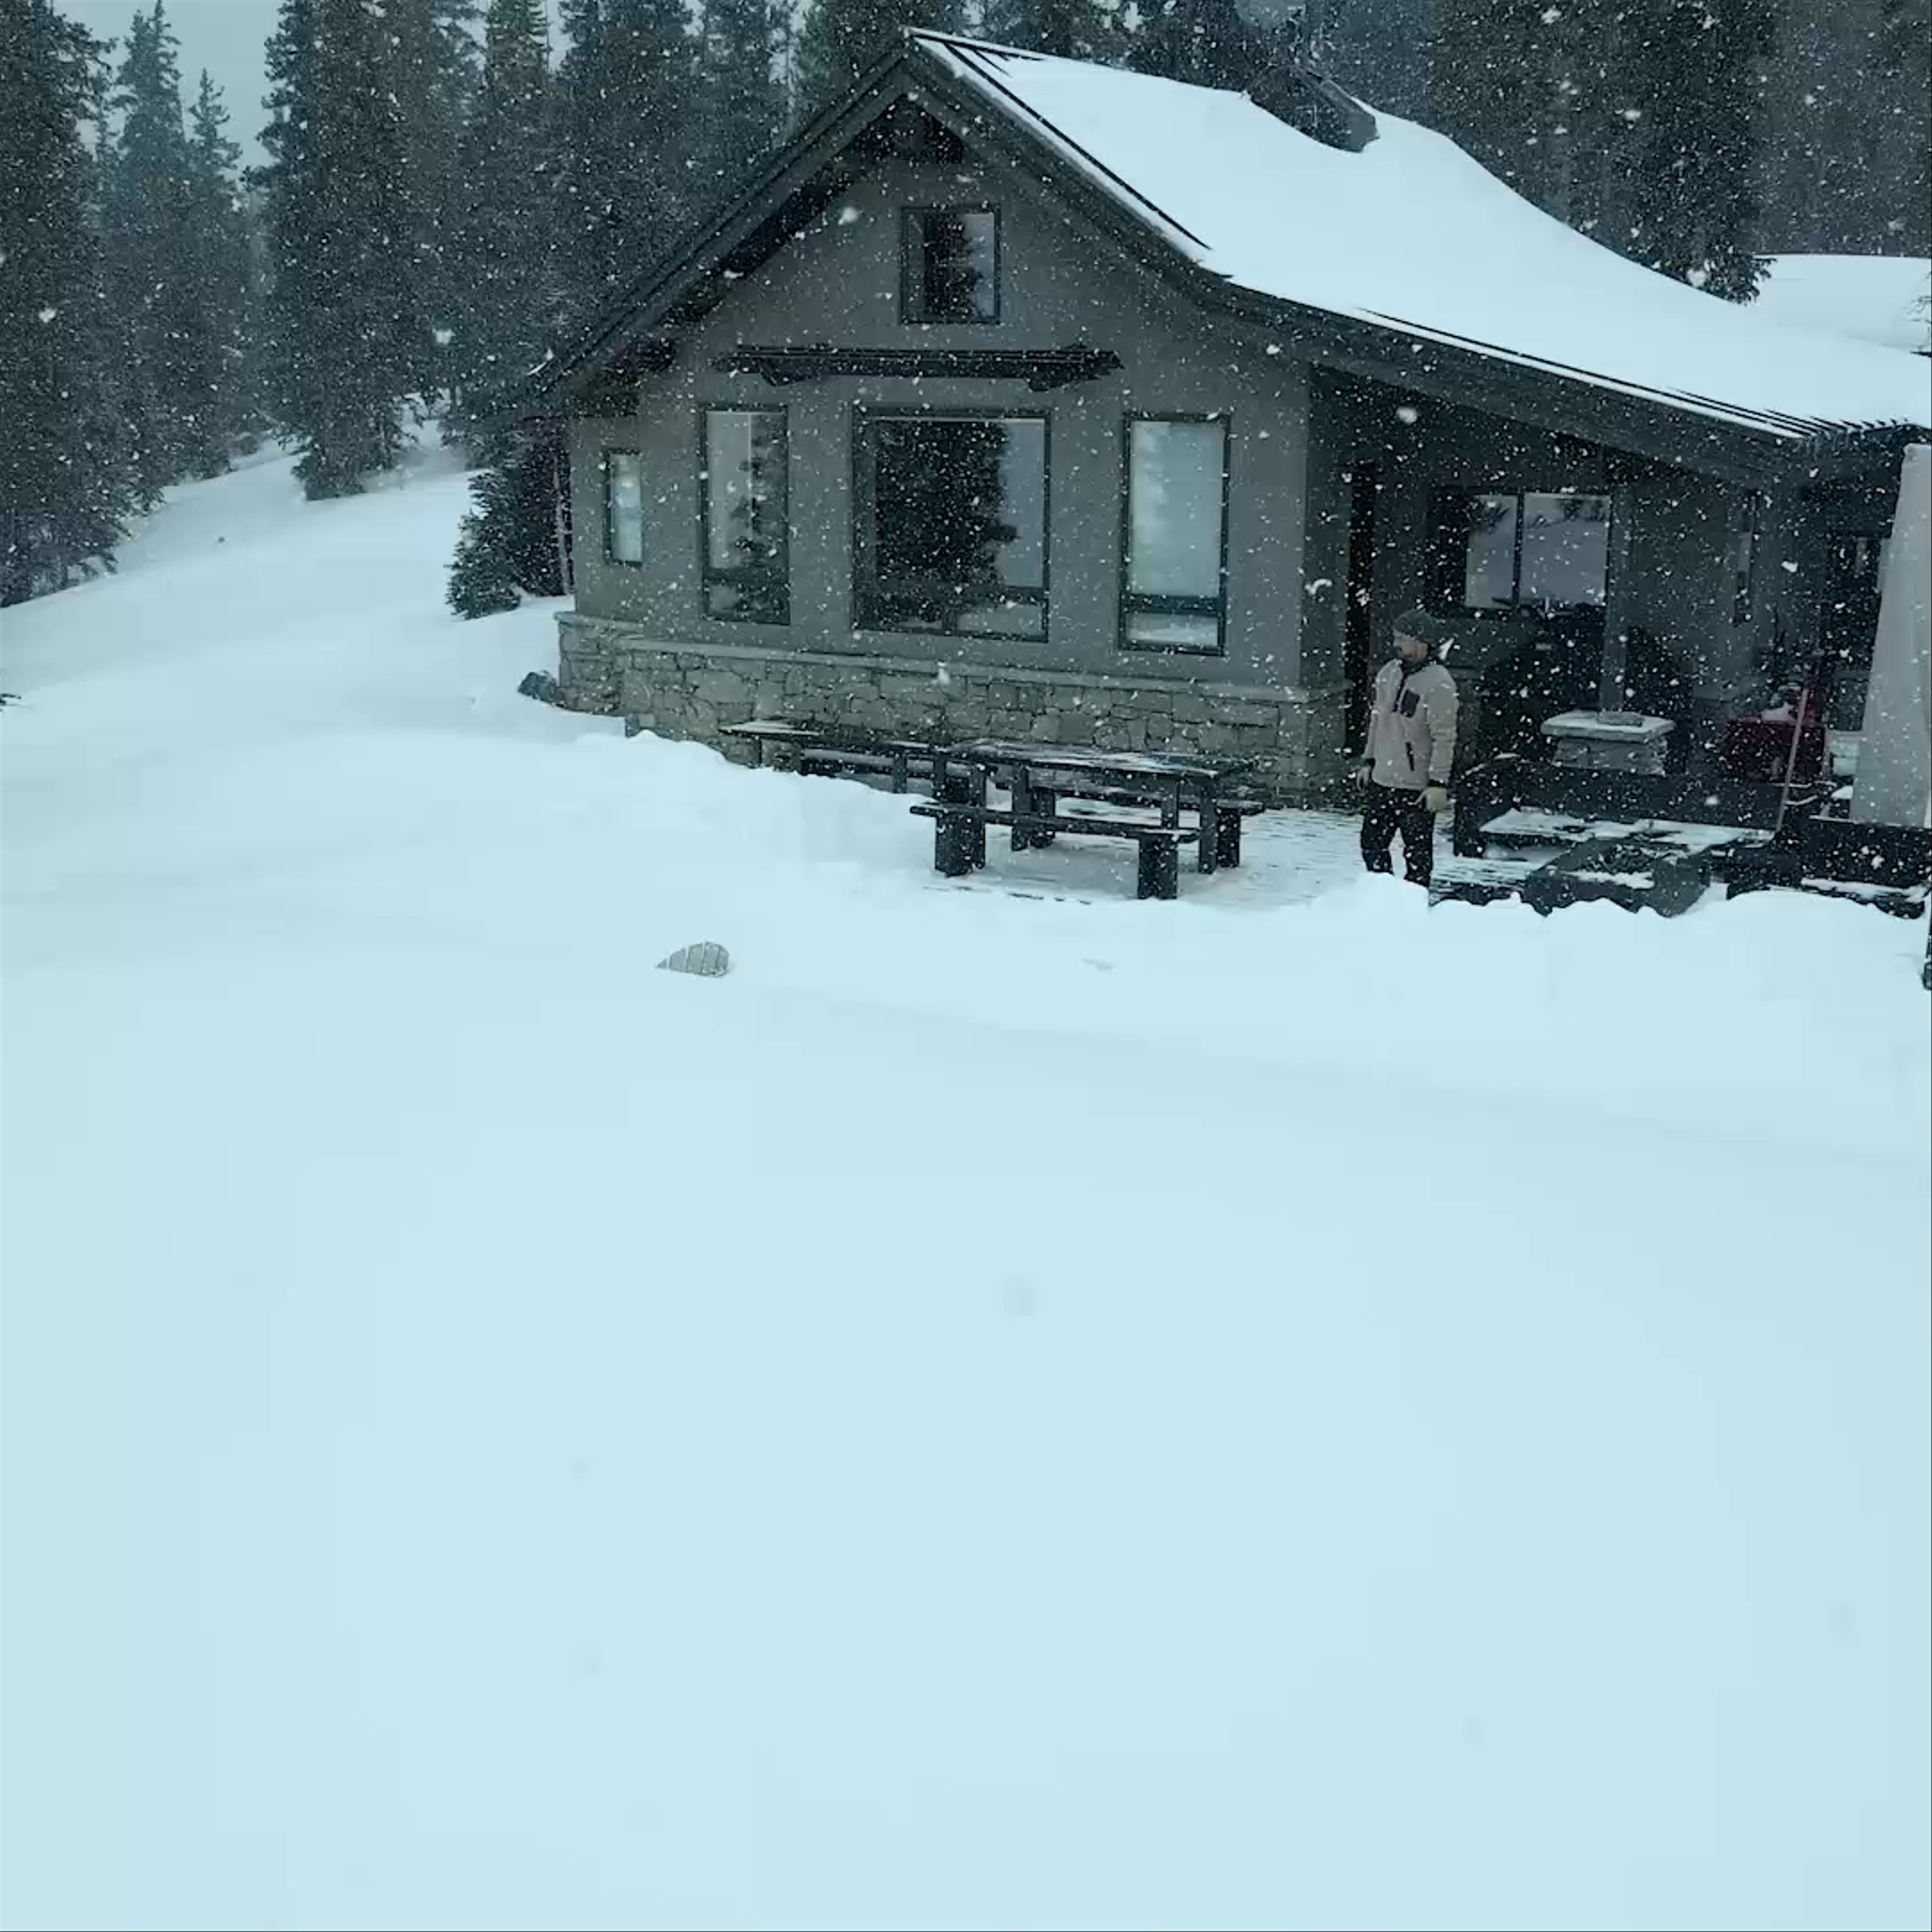 Video drone of man outside cabin pulling back to reveal full snowy mountain